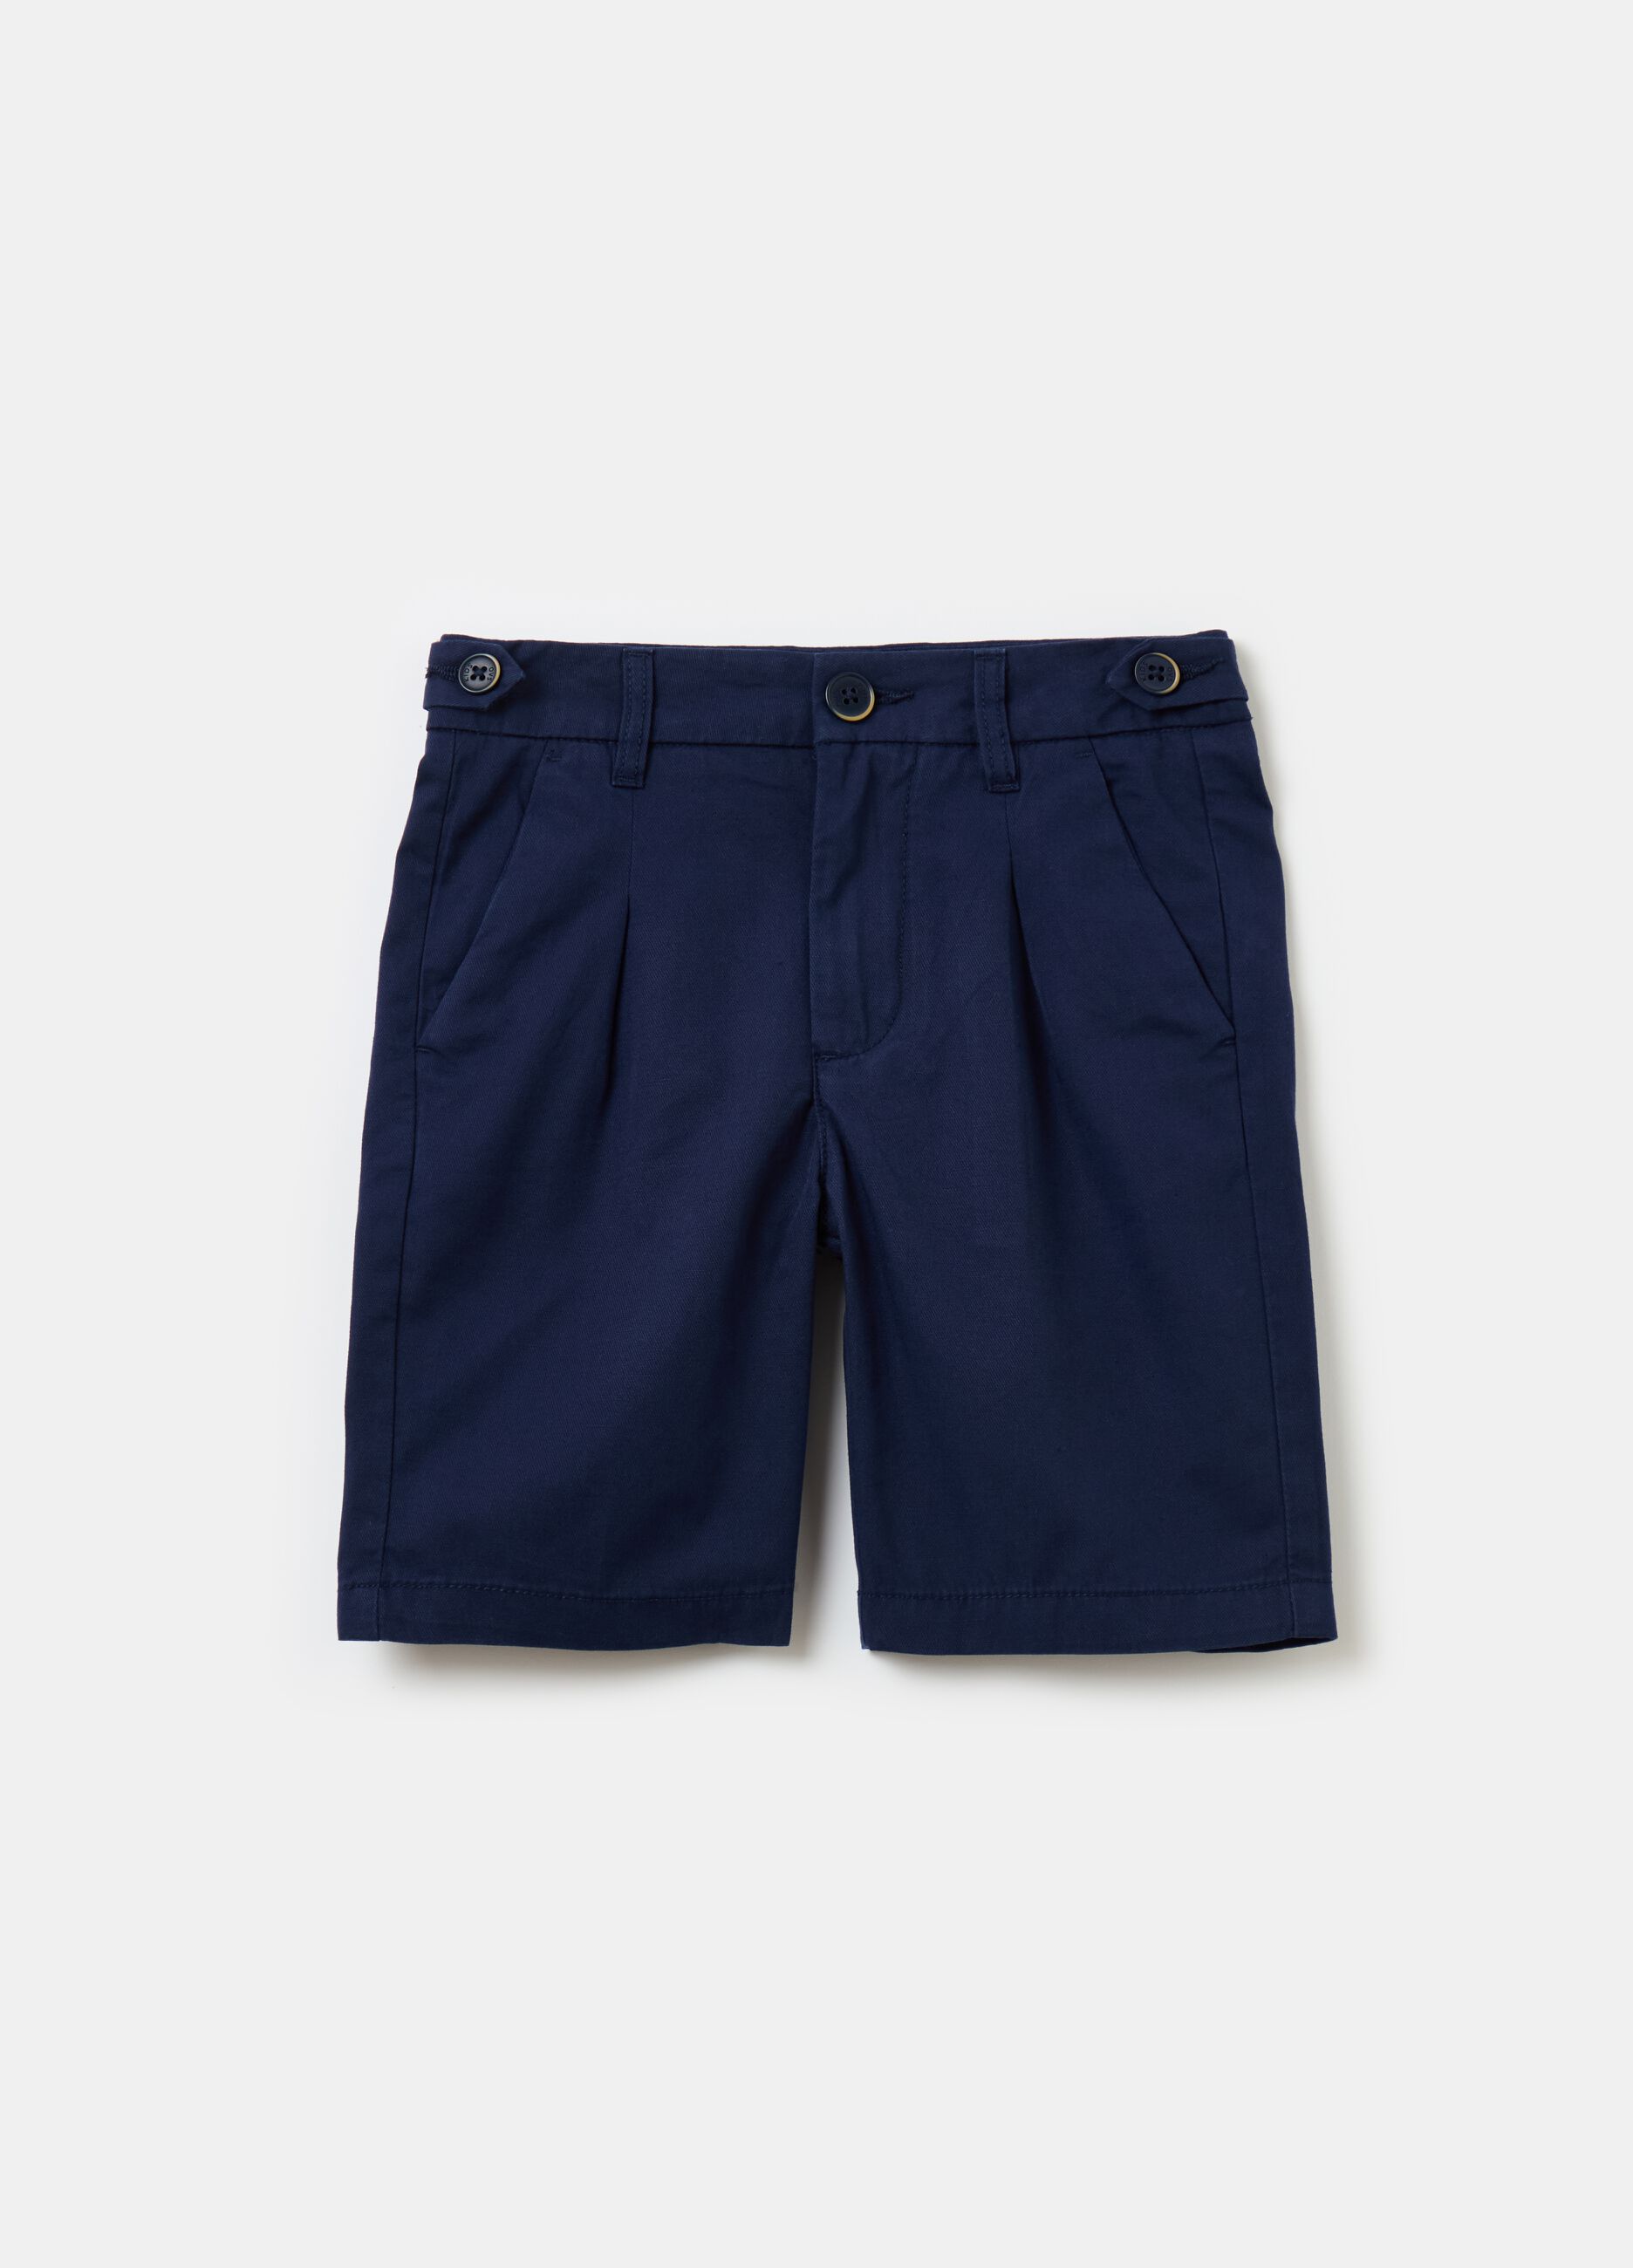 Chino Bermuda shorts in cotton and linen